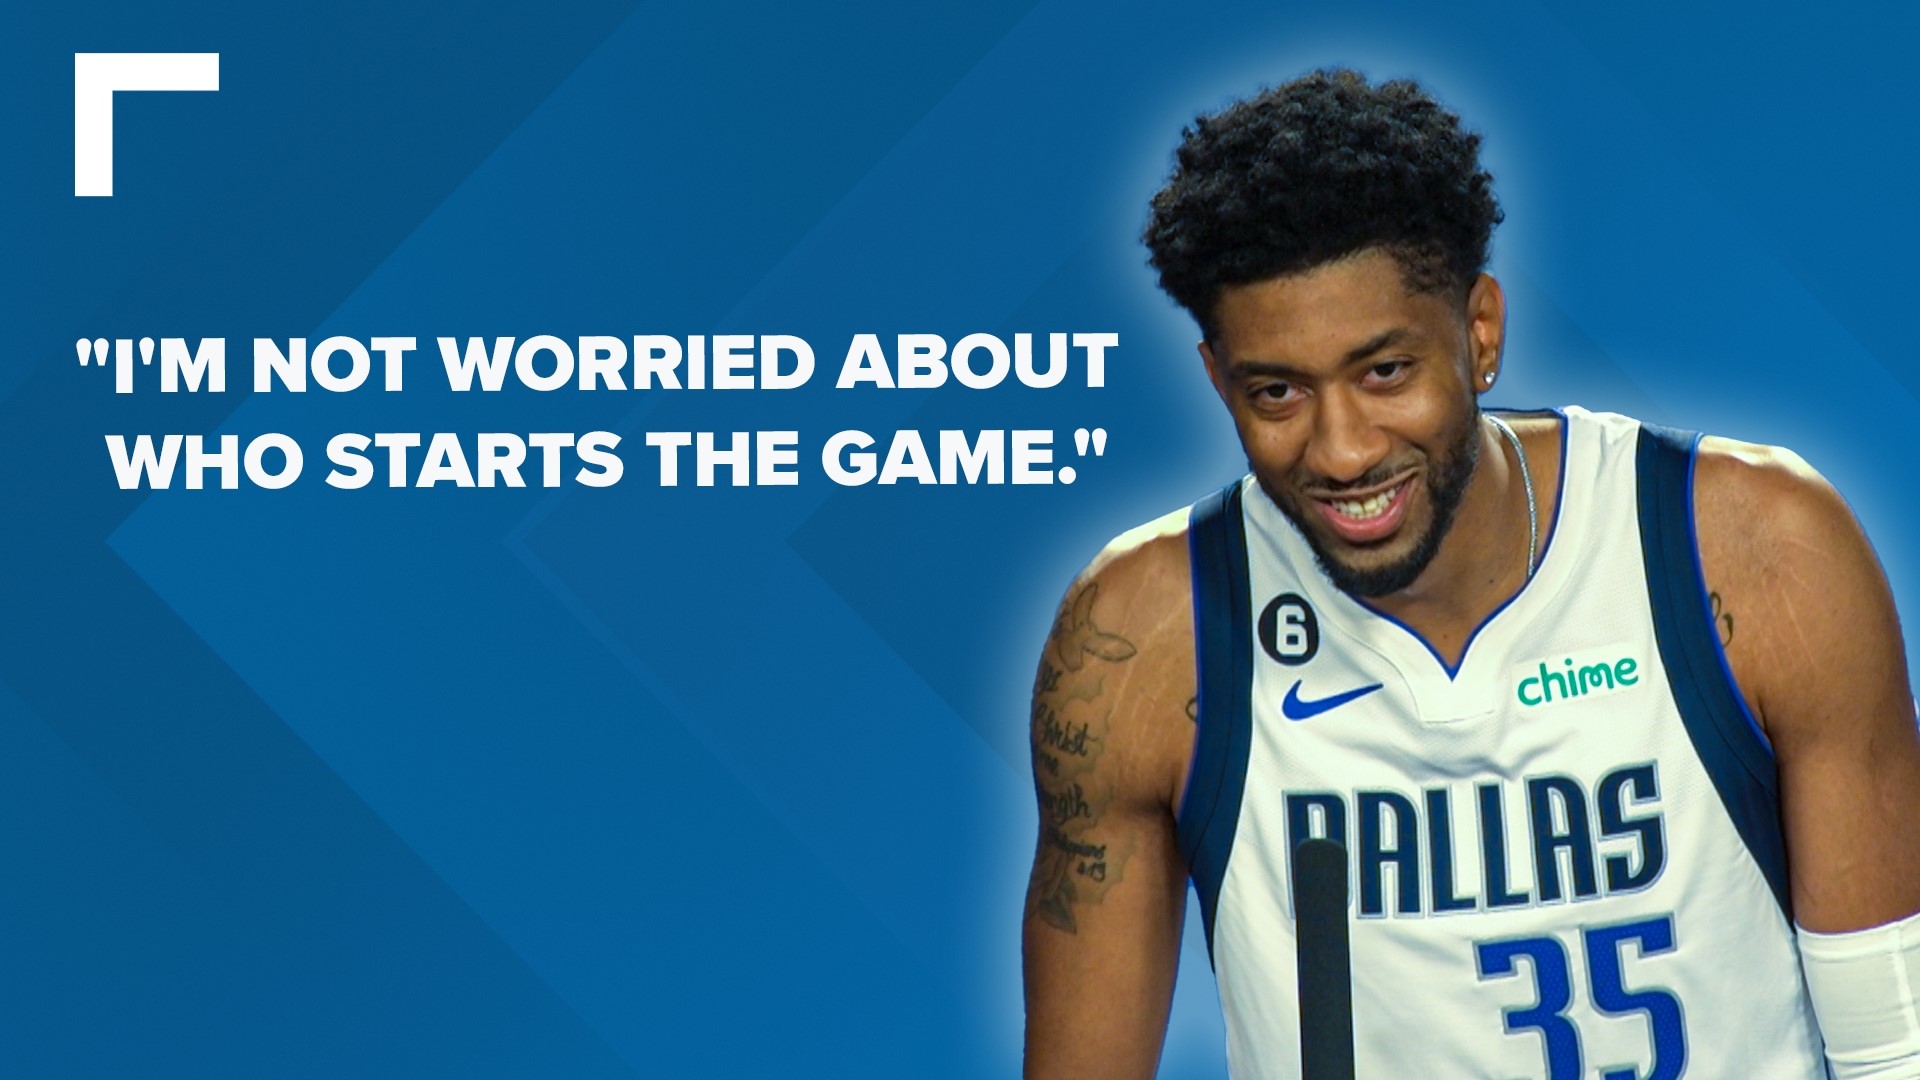 Christian Wood spoke on Monday during Mavs Media Day and talked about his expectations going into the 2022-2023 NBA season.